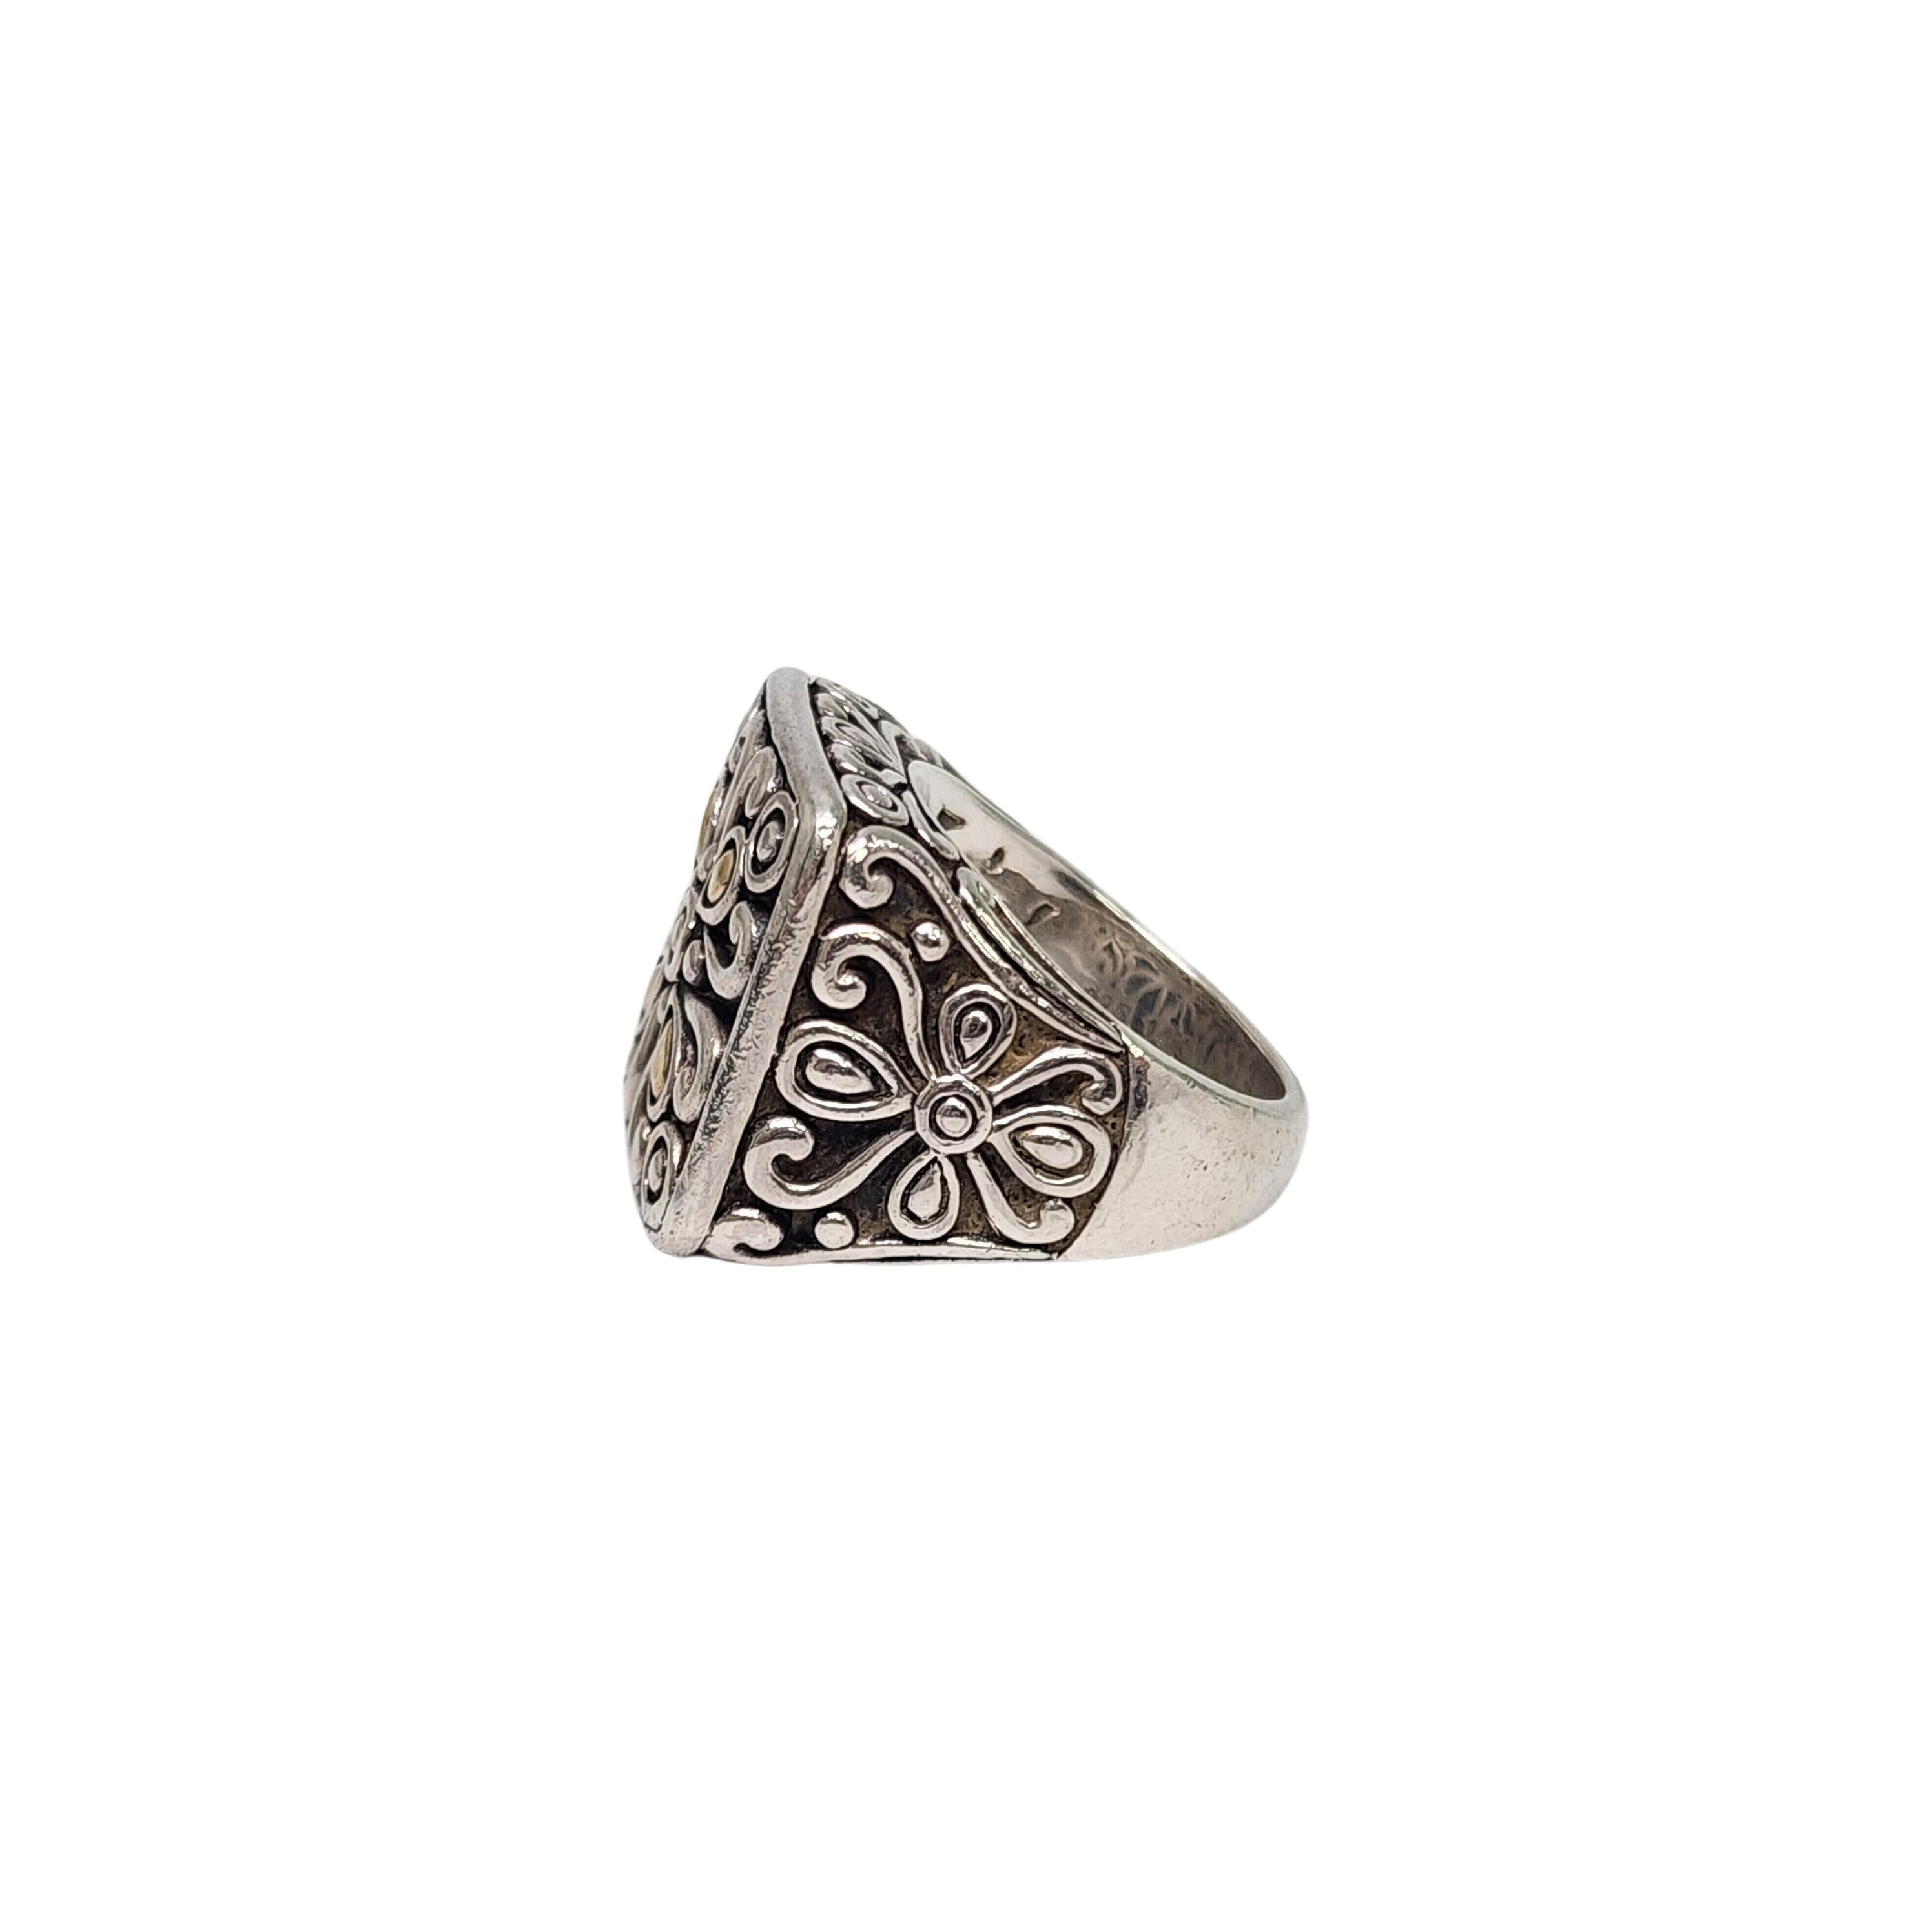 Sterling silver 14K yellow gold accent Bali ring by Angela by John Hardy.

Size 6

An affordable line by John Hardy, this Balinese inspired ring features a large square front with yellow gold teardrop accents.

Measures approx 3/4